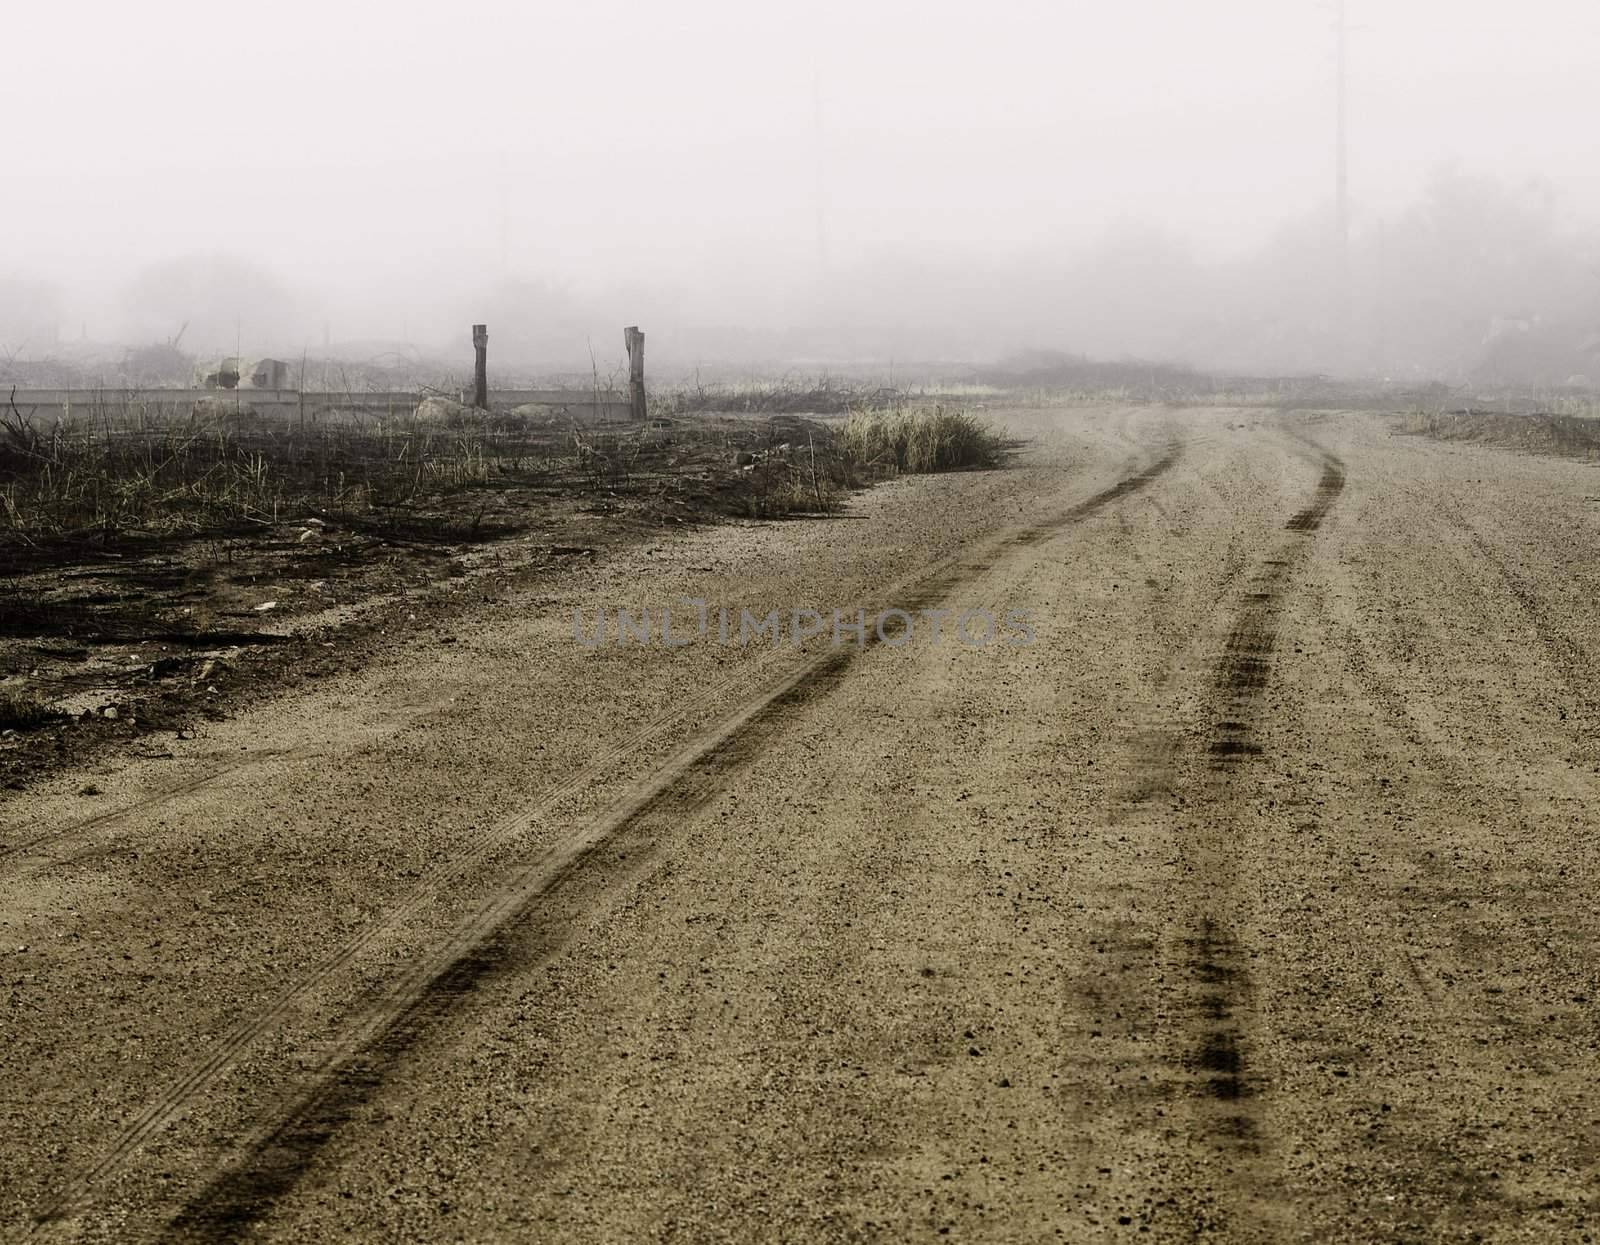 Tire tracks in dirt heading of into the distance on a foggy day.